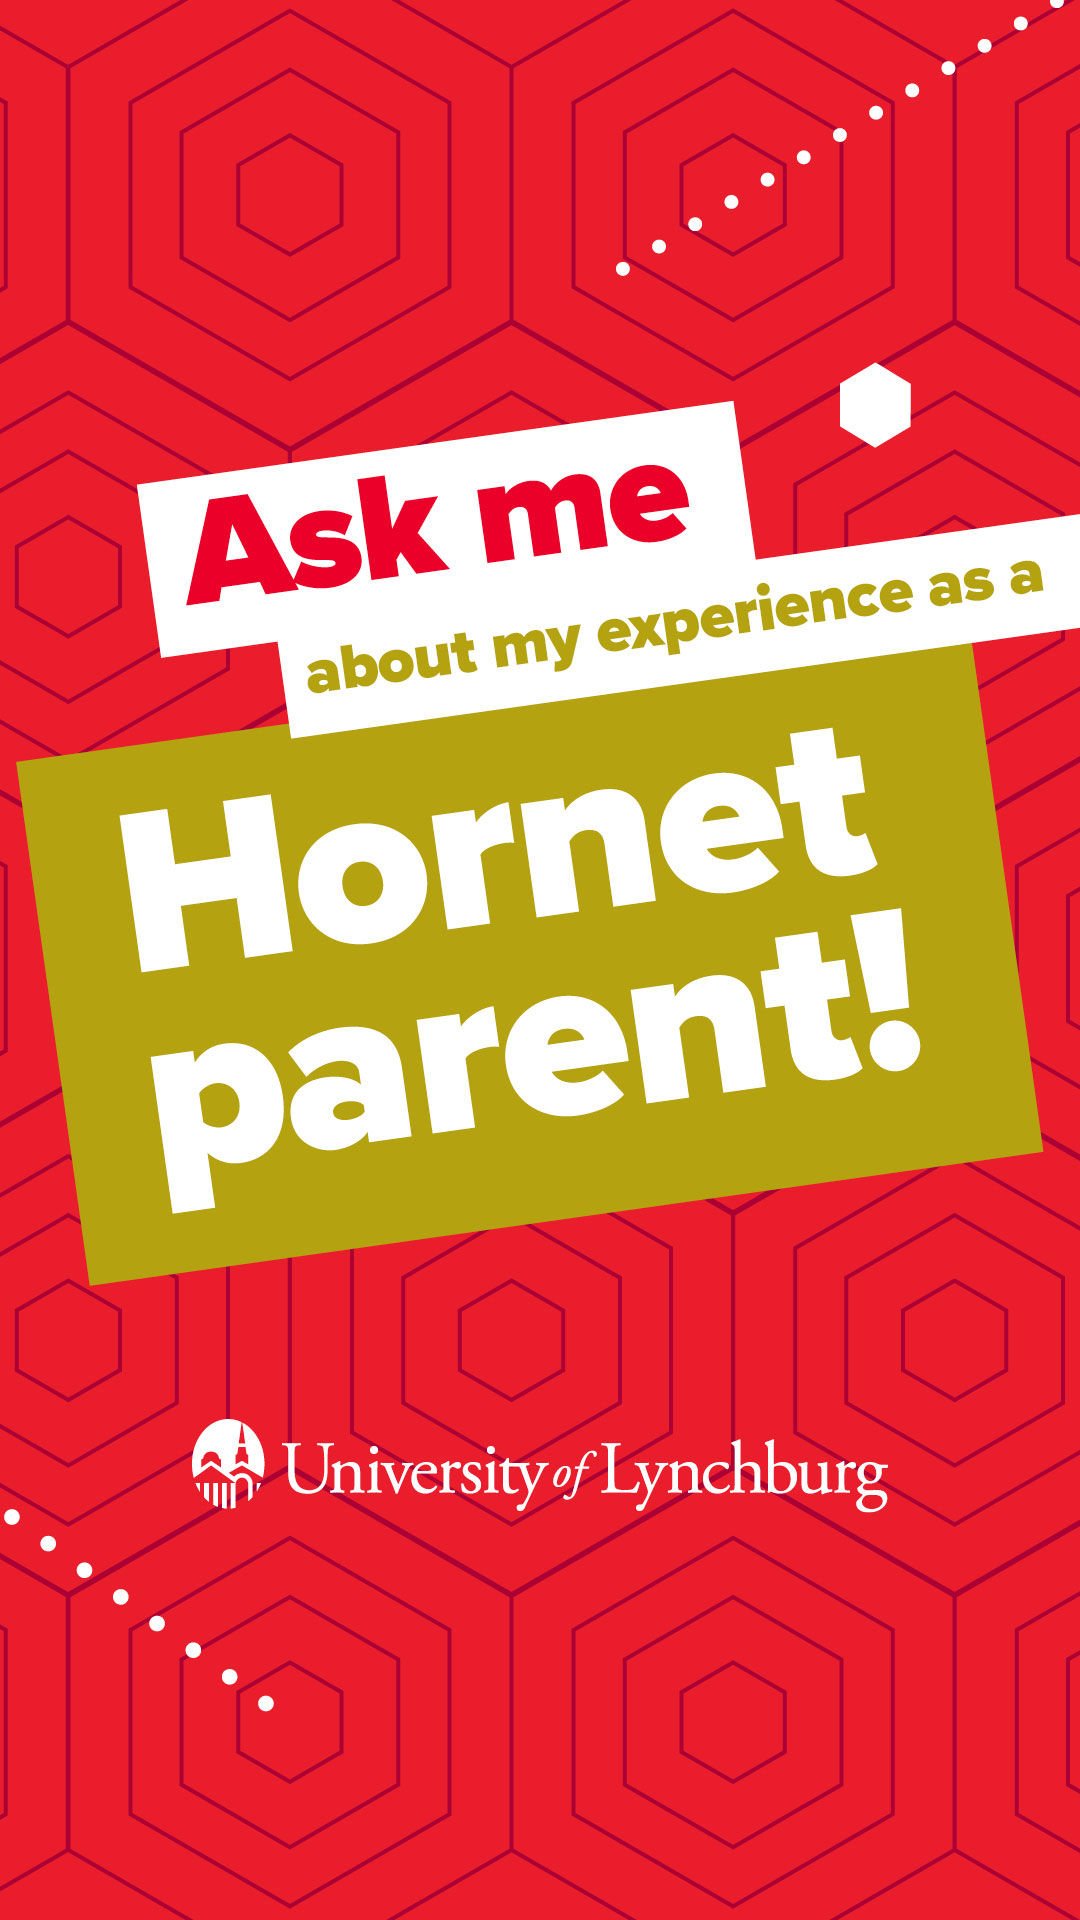 Ask me about my experience as a Hornet parent! University of Lynchburg